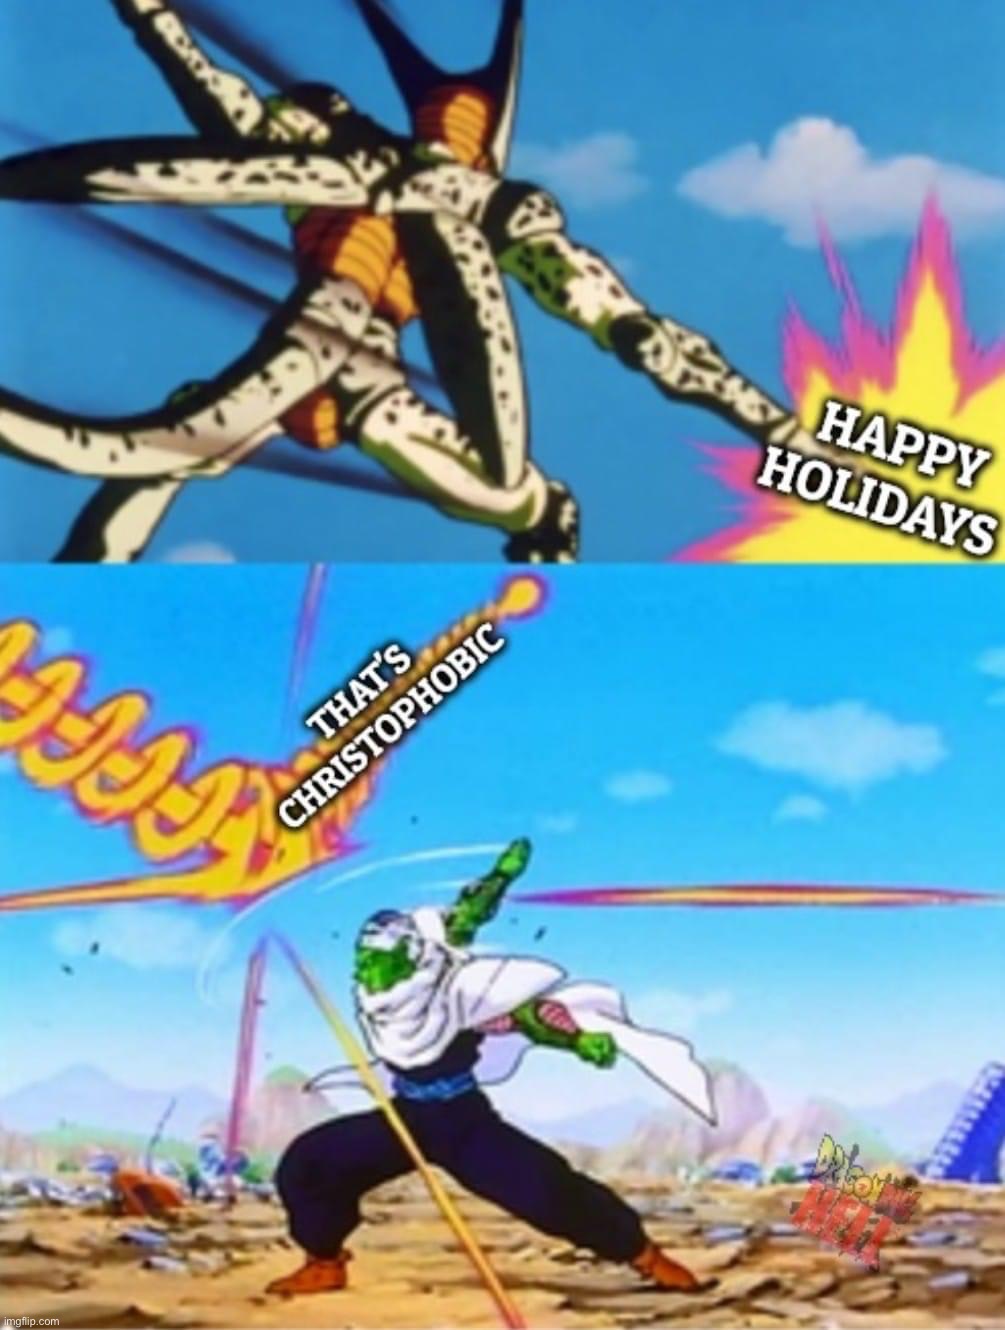 How Piccolo helped us win the War on Christmas. | image tagged in happy holidays that s christophobic,war on christmas,war on war on christmas,piccolo,dbz,dbz meme | made w/ Imgflip meme maker